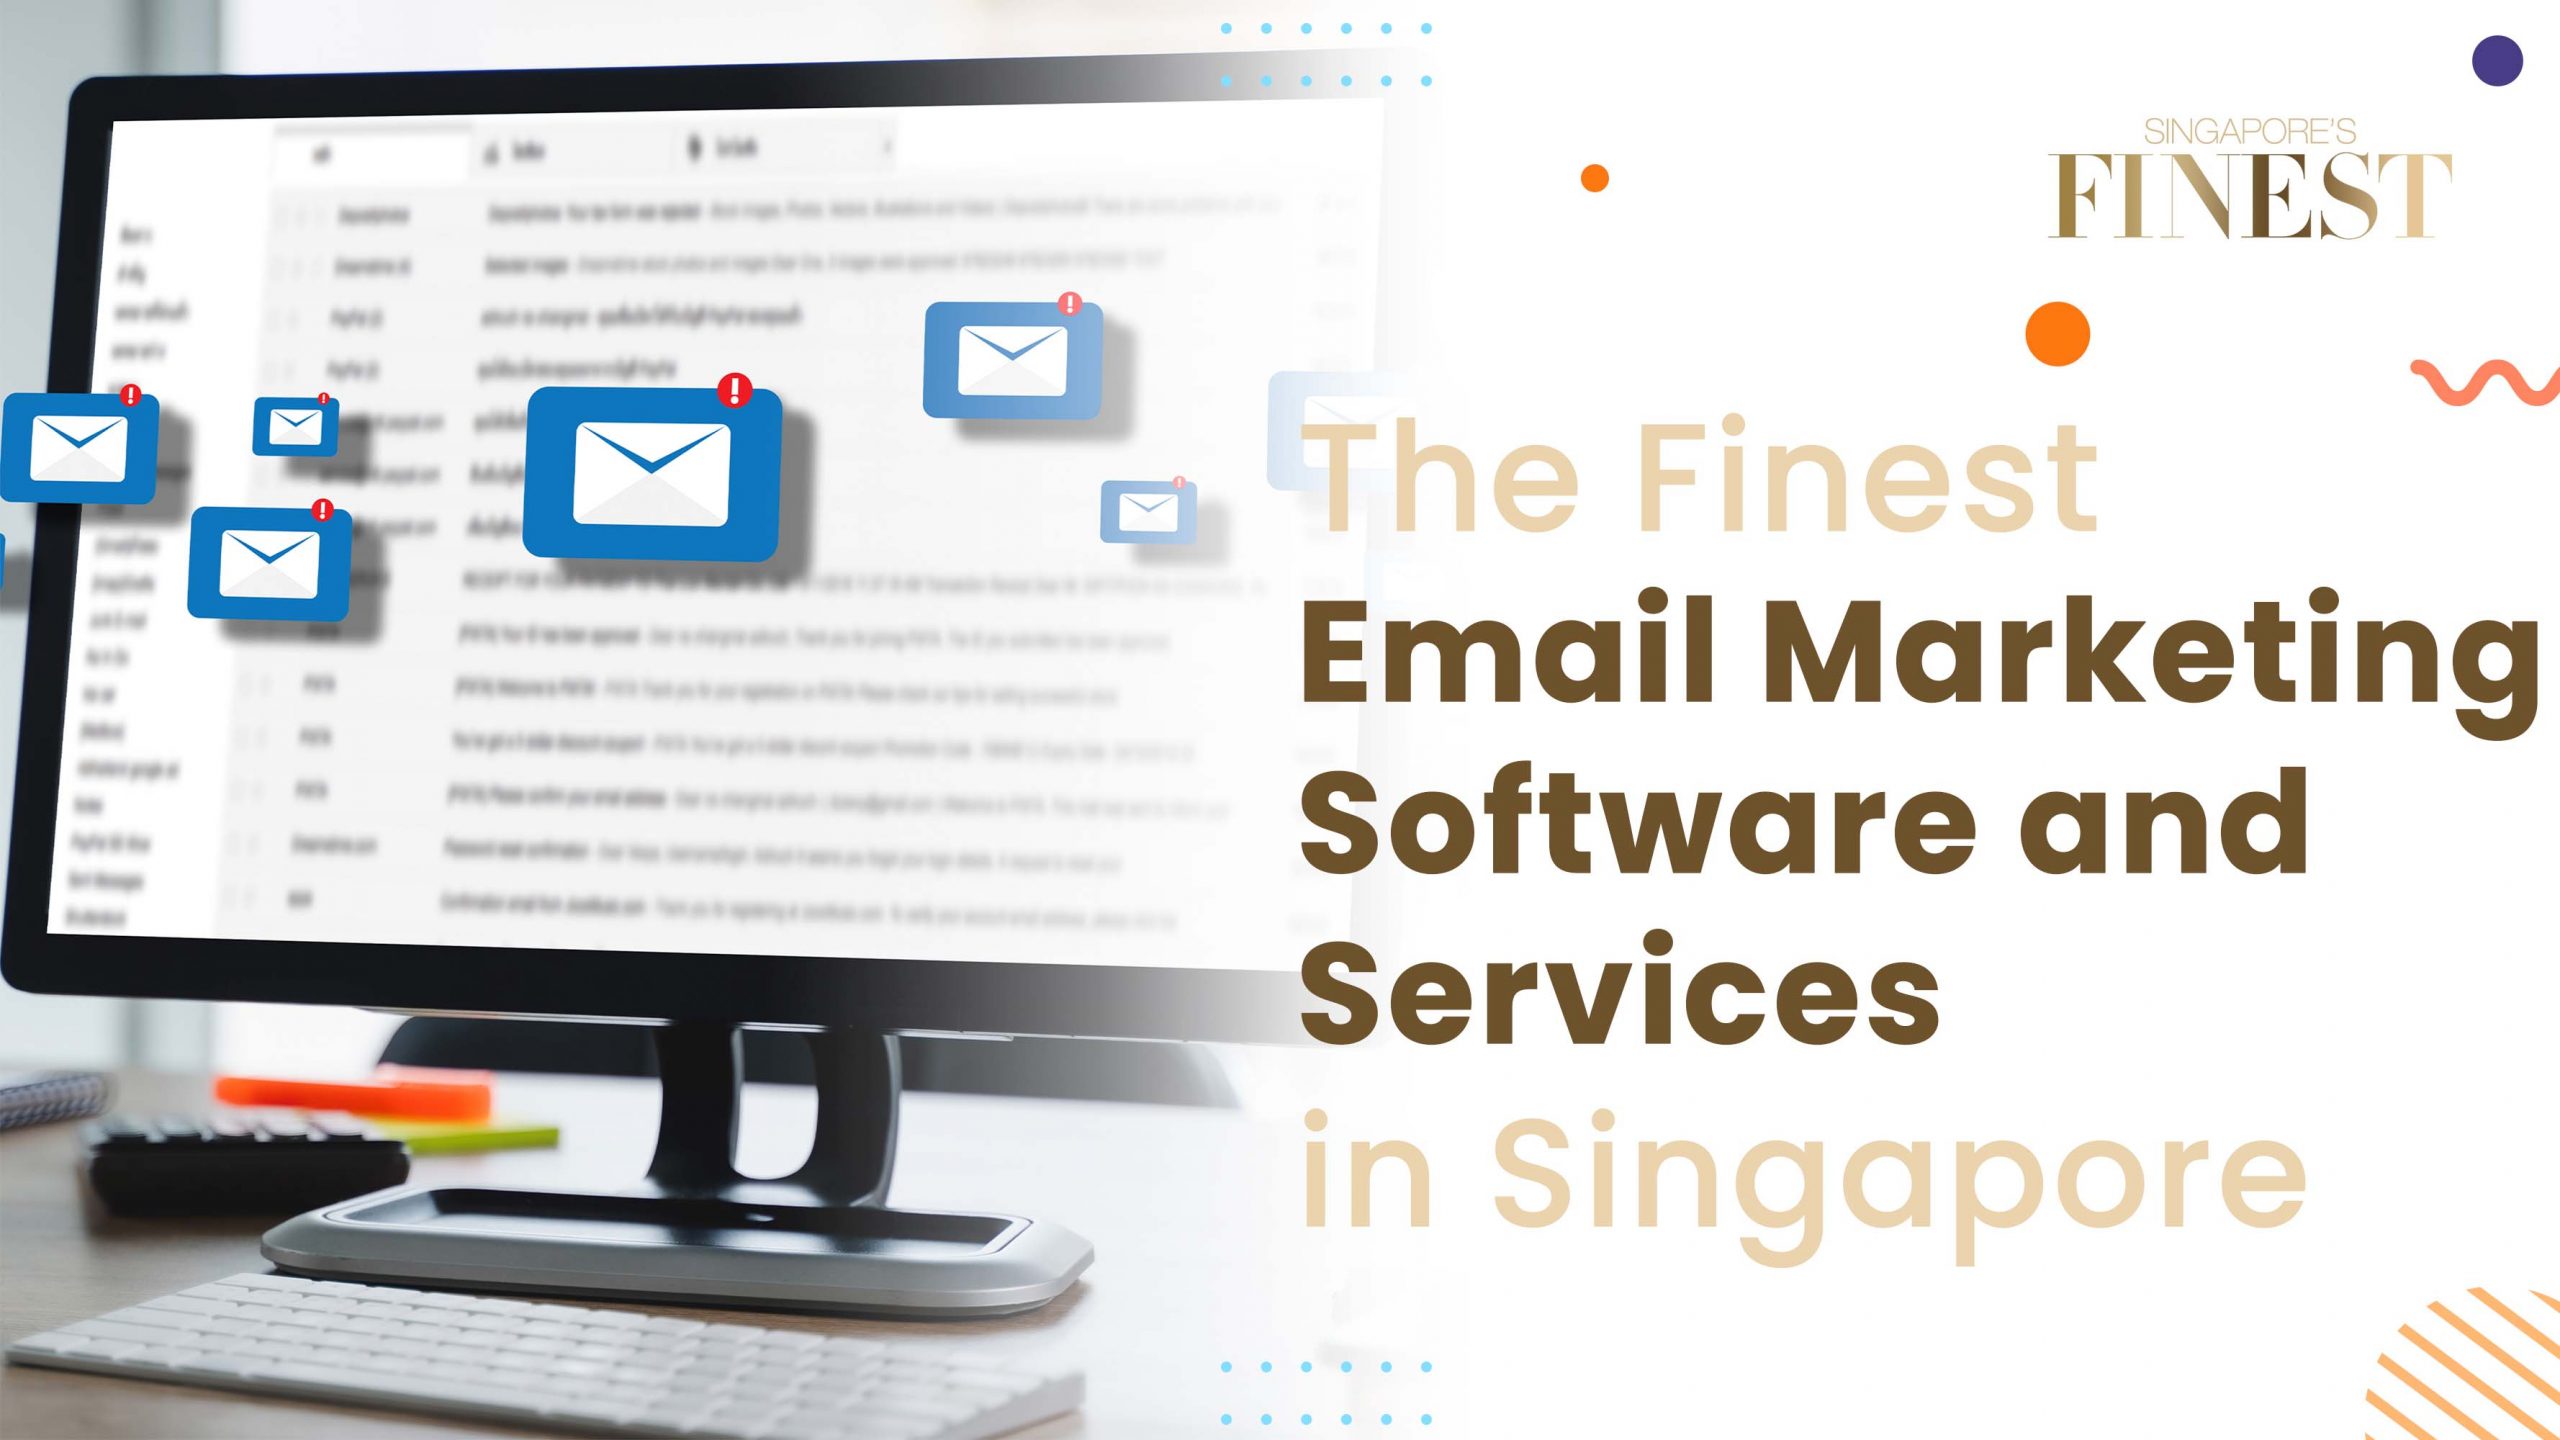 Finest Email Marketing Software and Services in Singapore